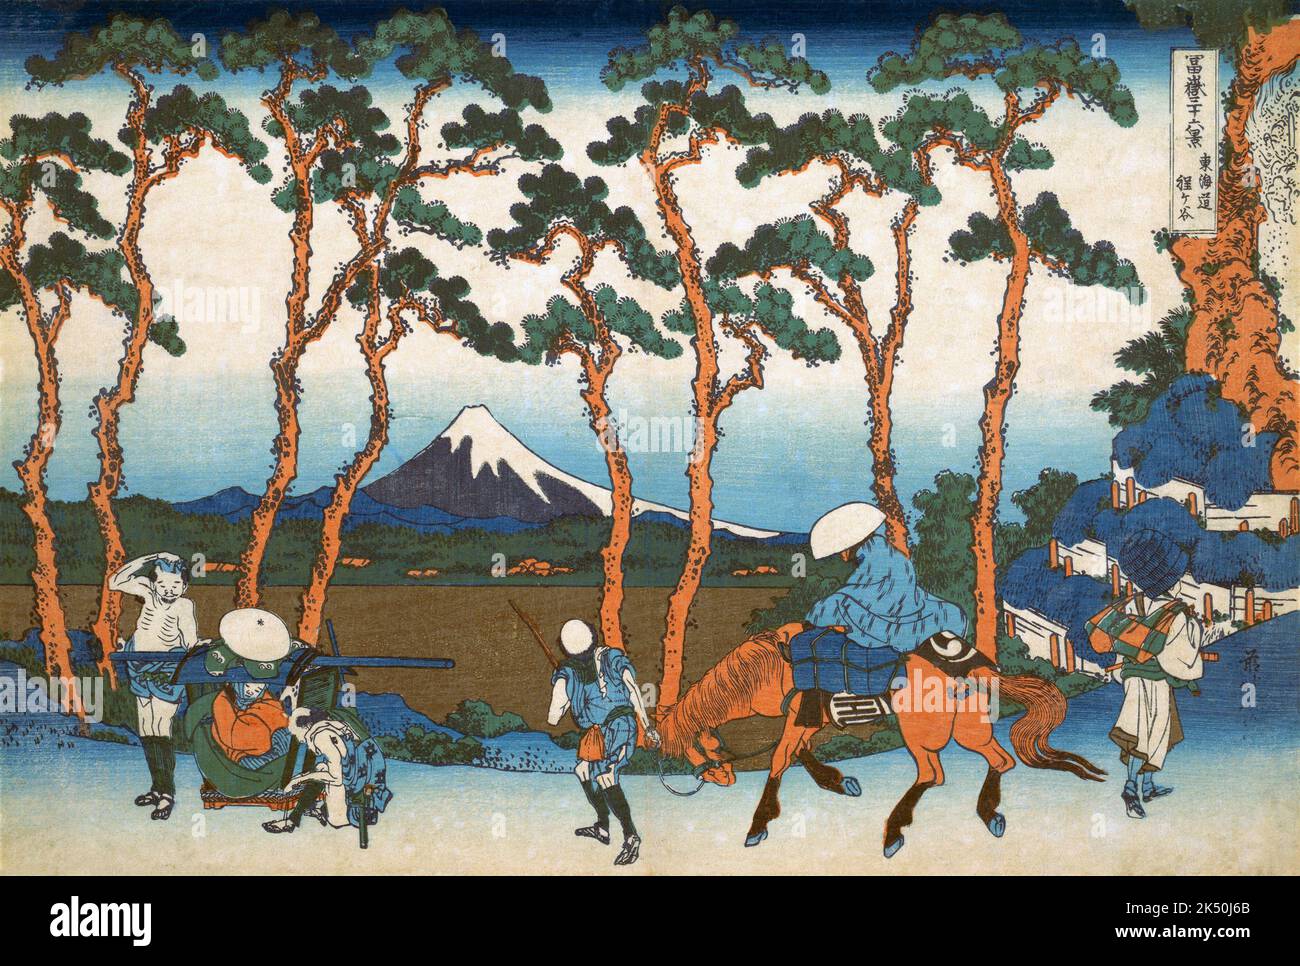 Japan: ‘Hodogaya on the Tokaido Road’. Ukiyo-e woodblock print from the series ‘Thirty-Six Views of Mount Fuji’ by Katsushika Hokusai (31 October 1760 - 10 May 1849), 1830.  ‘Thirty-six Views of Mount Fuji’ is an ‘ukiyo-e’ series of woodcut prints by Japanese artist Katsushika Hokusai. The series depicts Mount Fuji in differing seasons and weather conditions from a variety of places and distances. It actually consists of 46 prints created between 1826 and 1833. The first 36 were included in the original publication and, due to their popularity, 10 more were added after the original publication Stock Photo